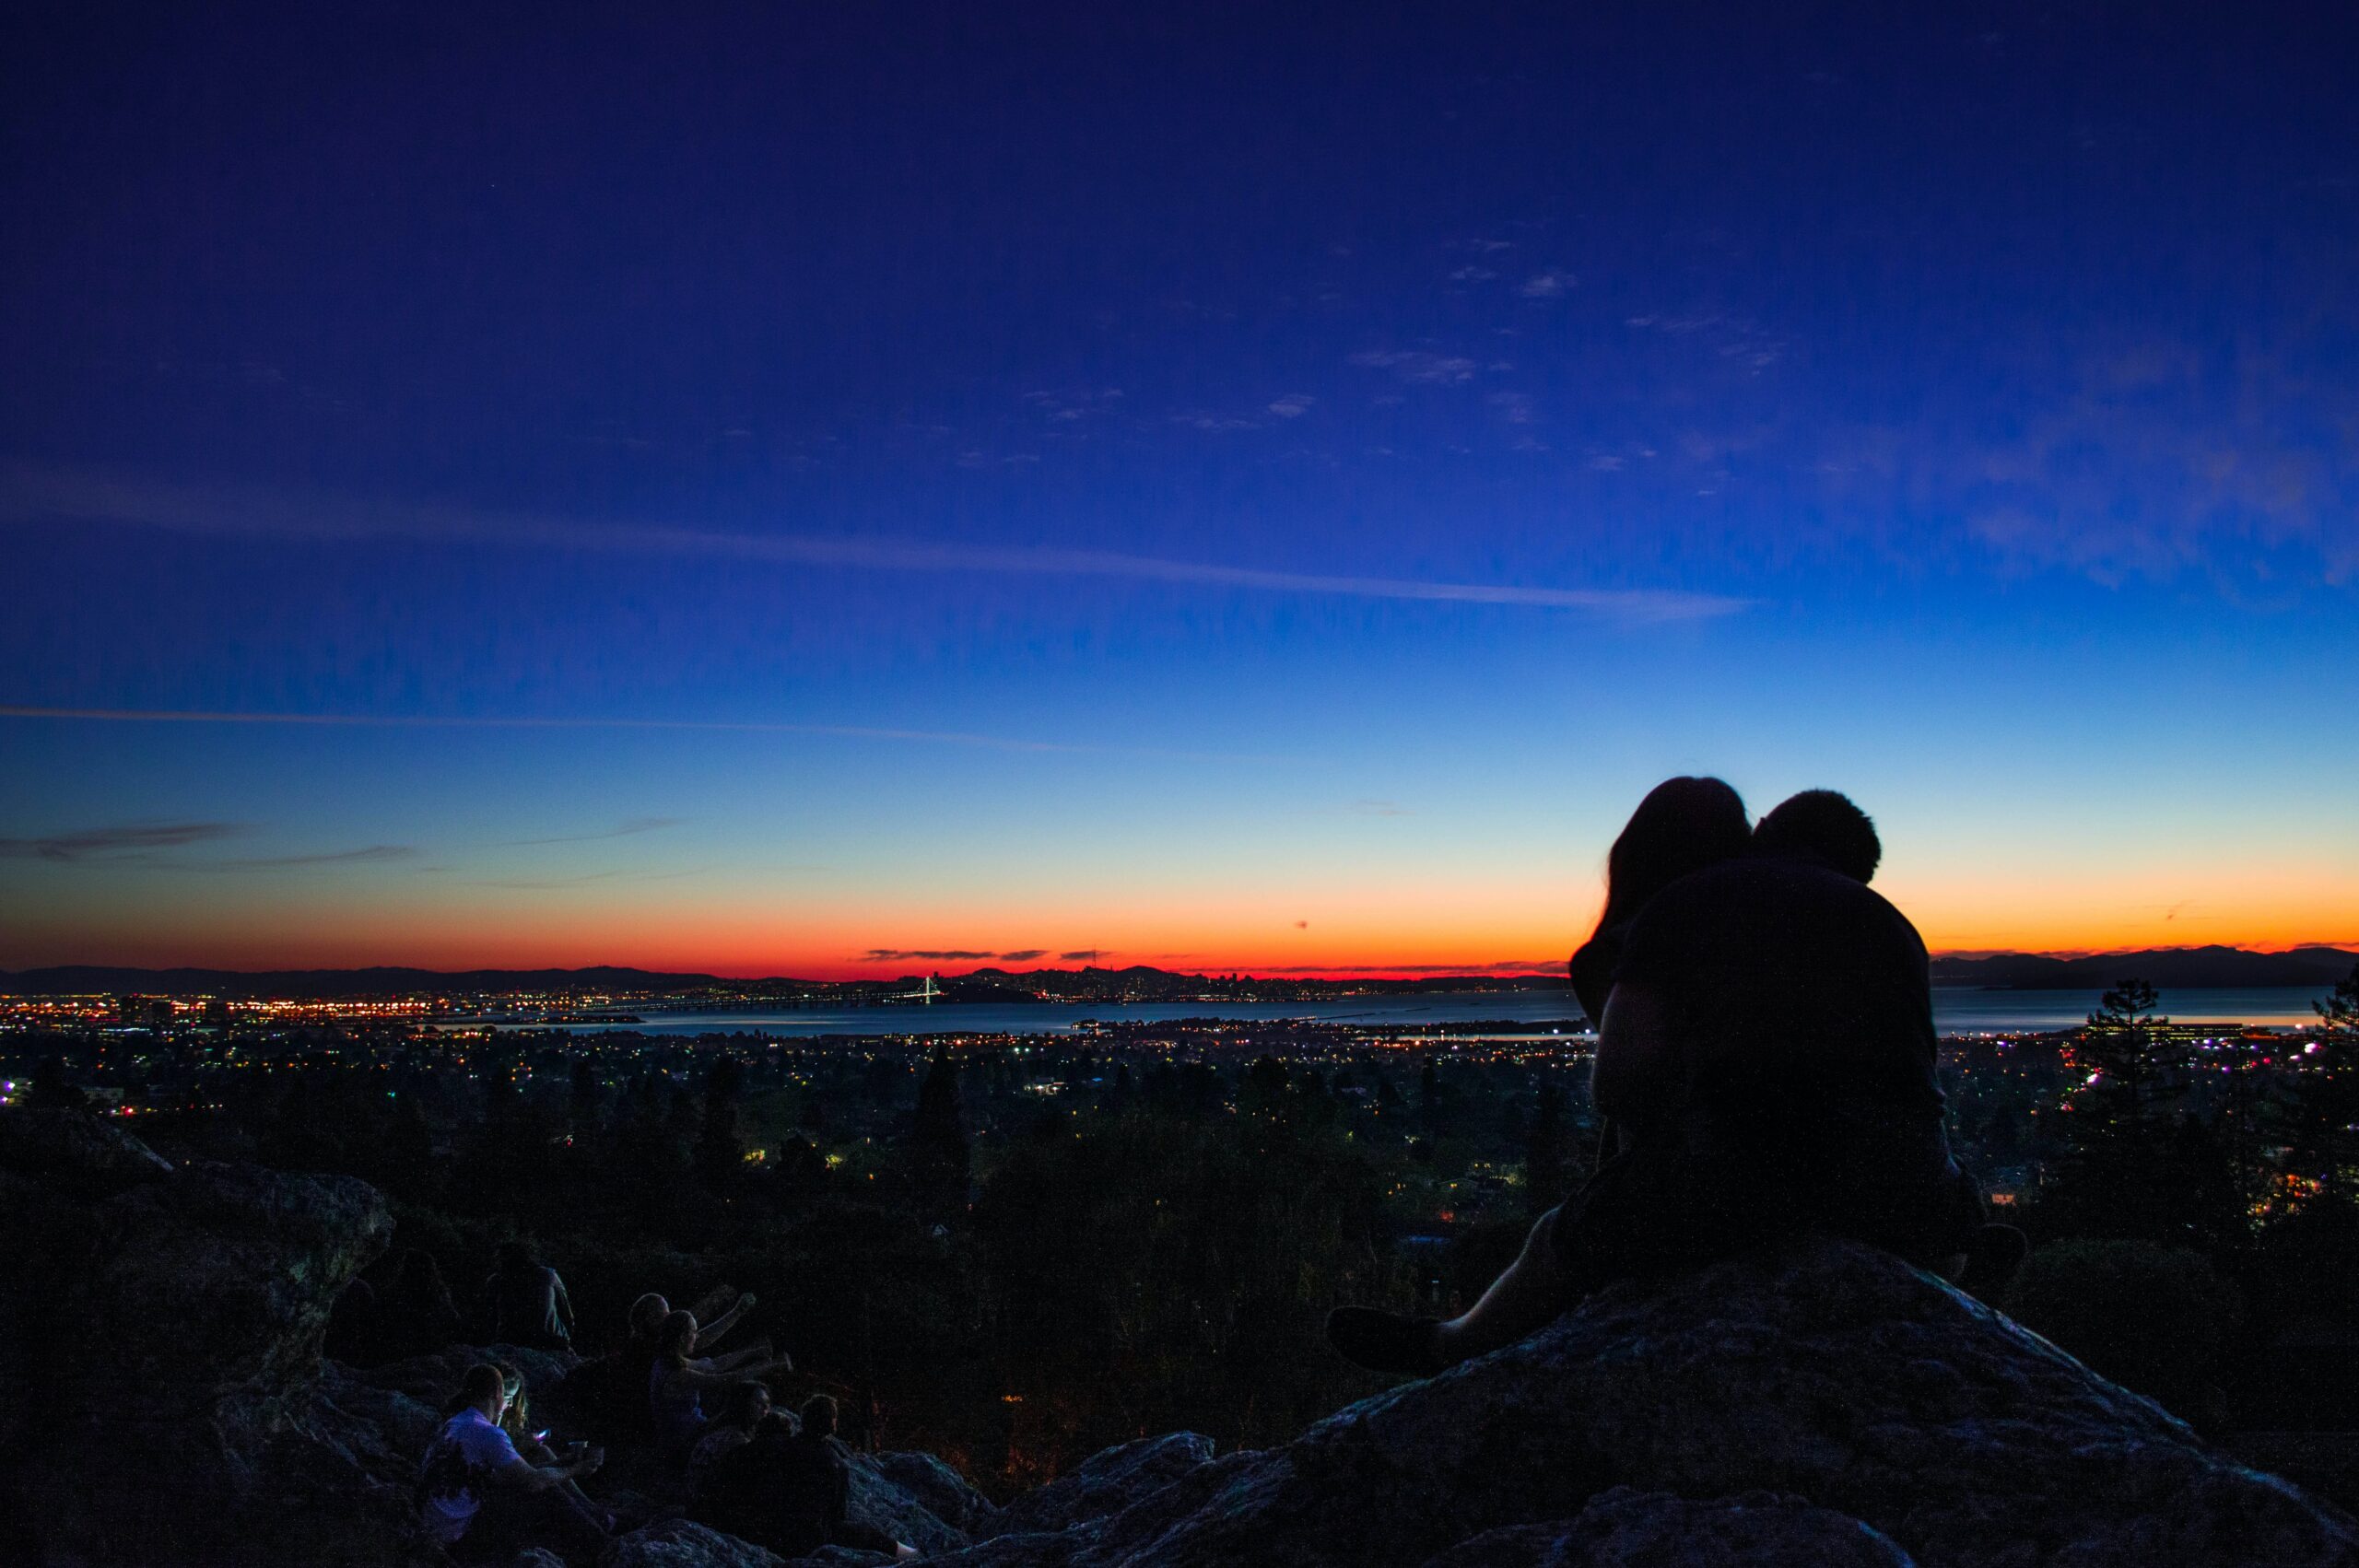 Silhouette of Couple on Mountain Above Town at Sunset